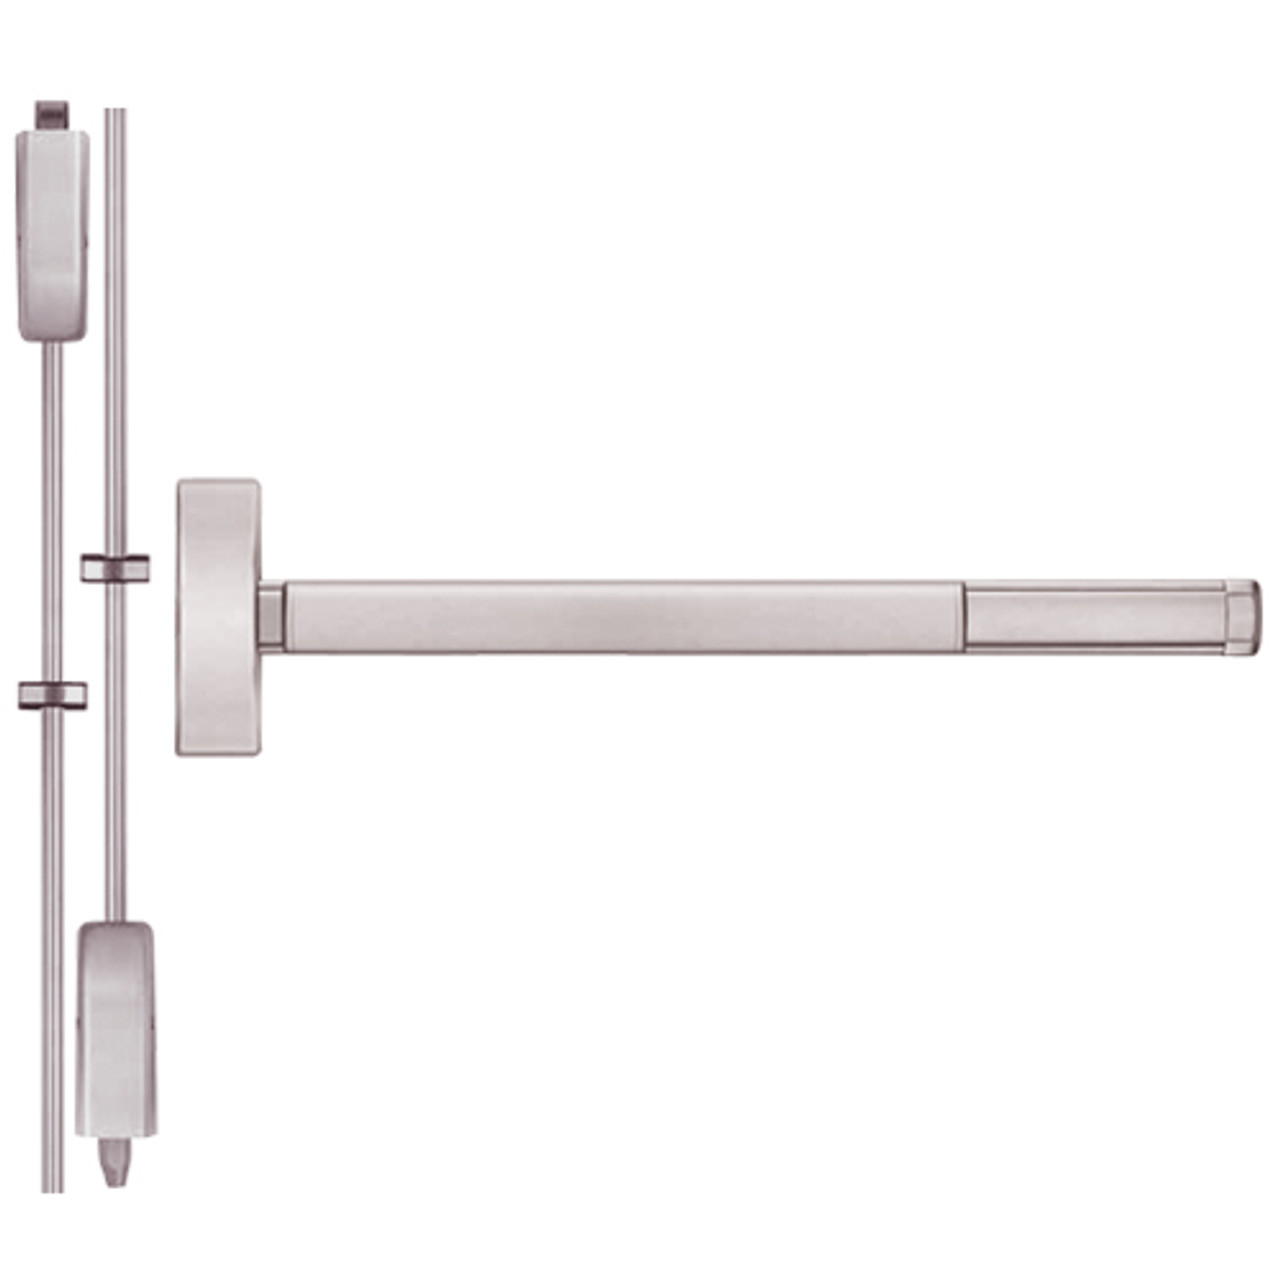 ELRFL2205LBR-628-36 PHI 2200 Series Apex Surface Vertical Rod Device with Electric Latch Retraction Prepped for Key Controls Thumb Piece in Satin Aluminum Finish